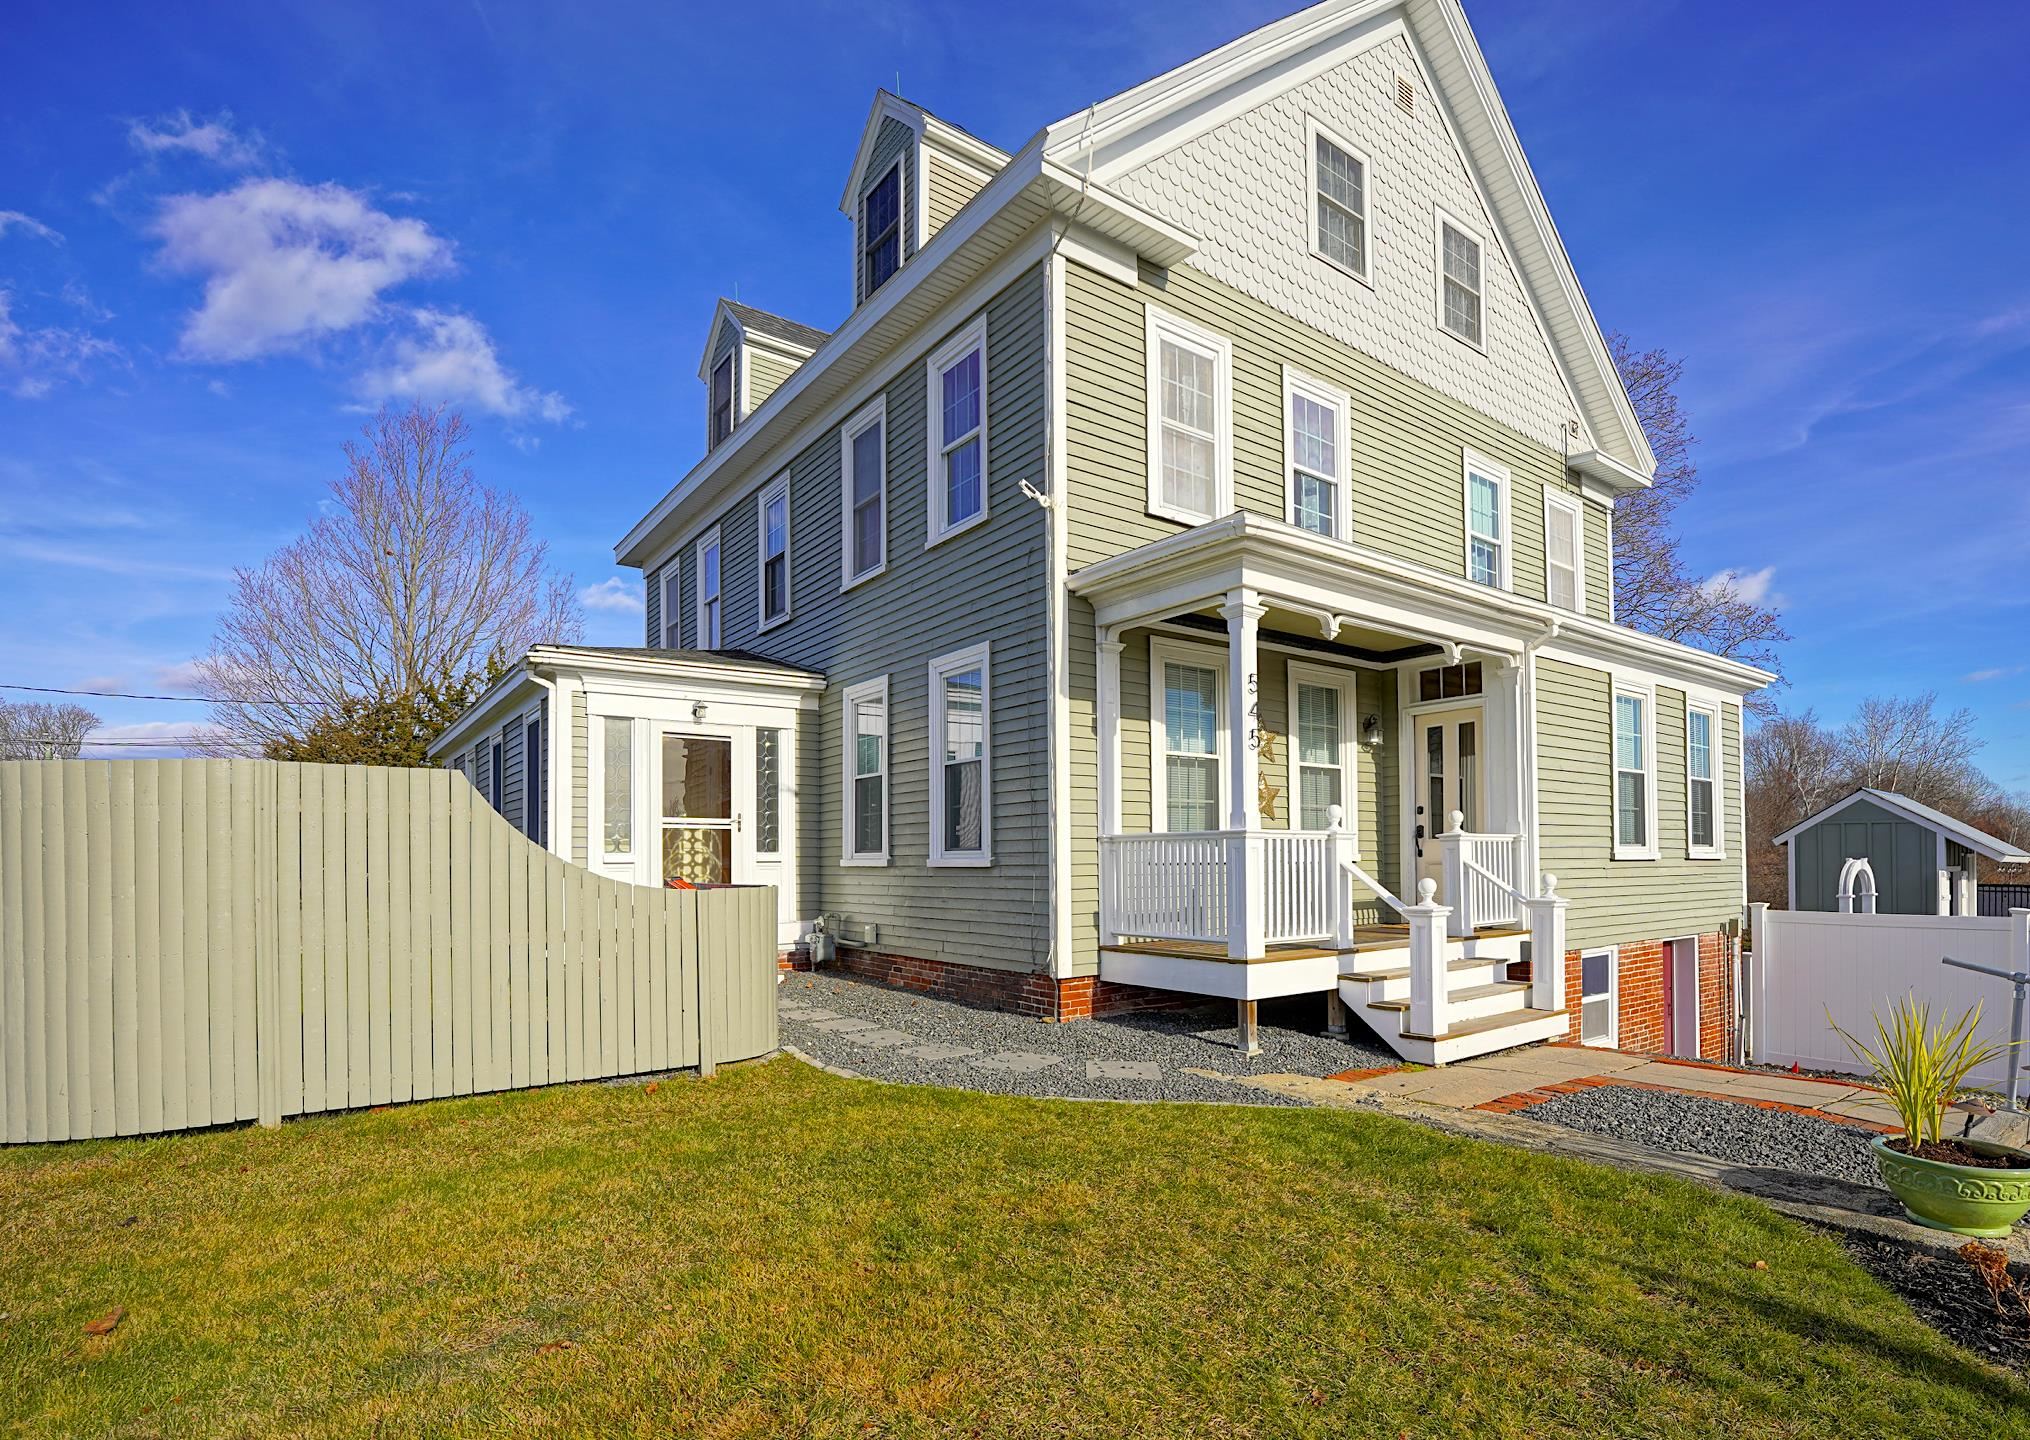 Photo of 545 Peverly Hill Road Portsmouth NH 03801